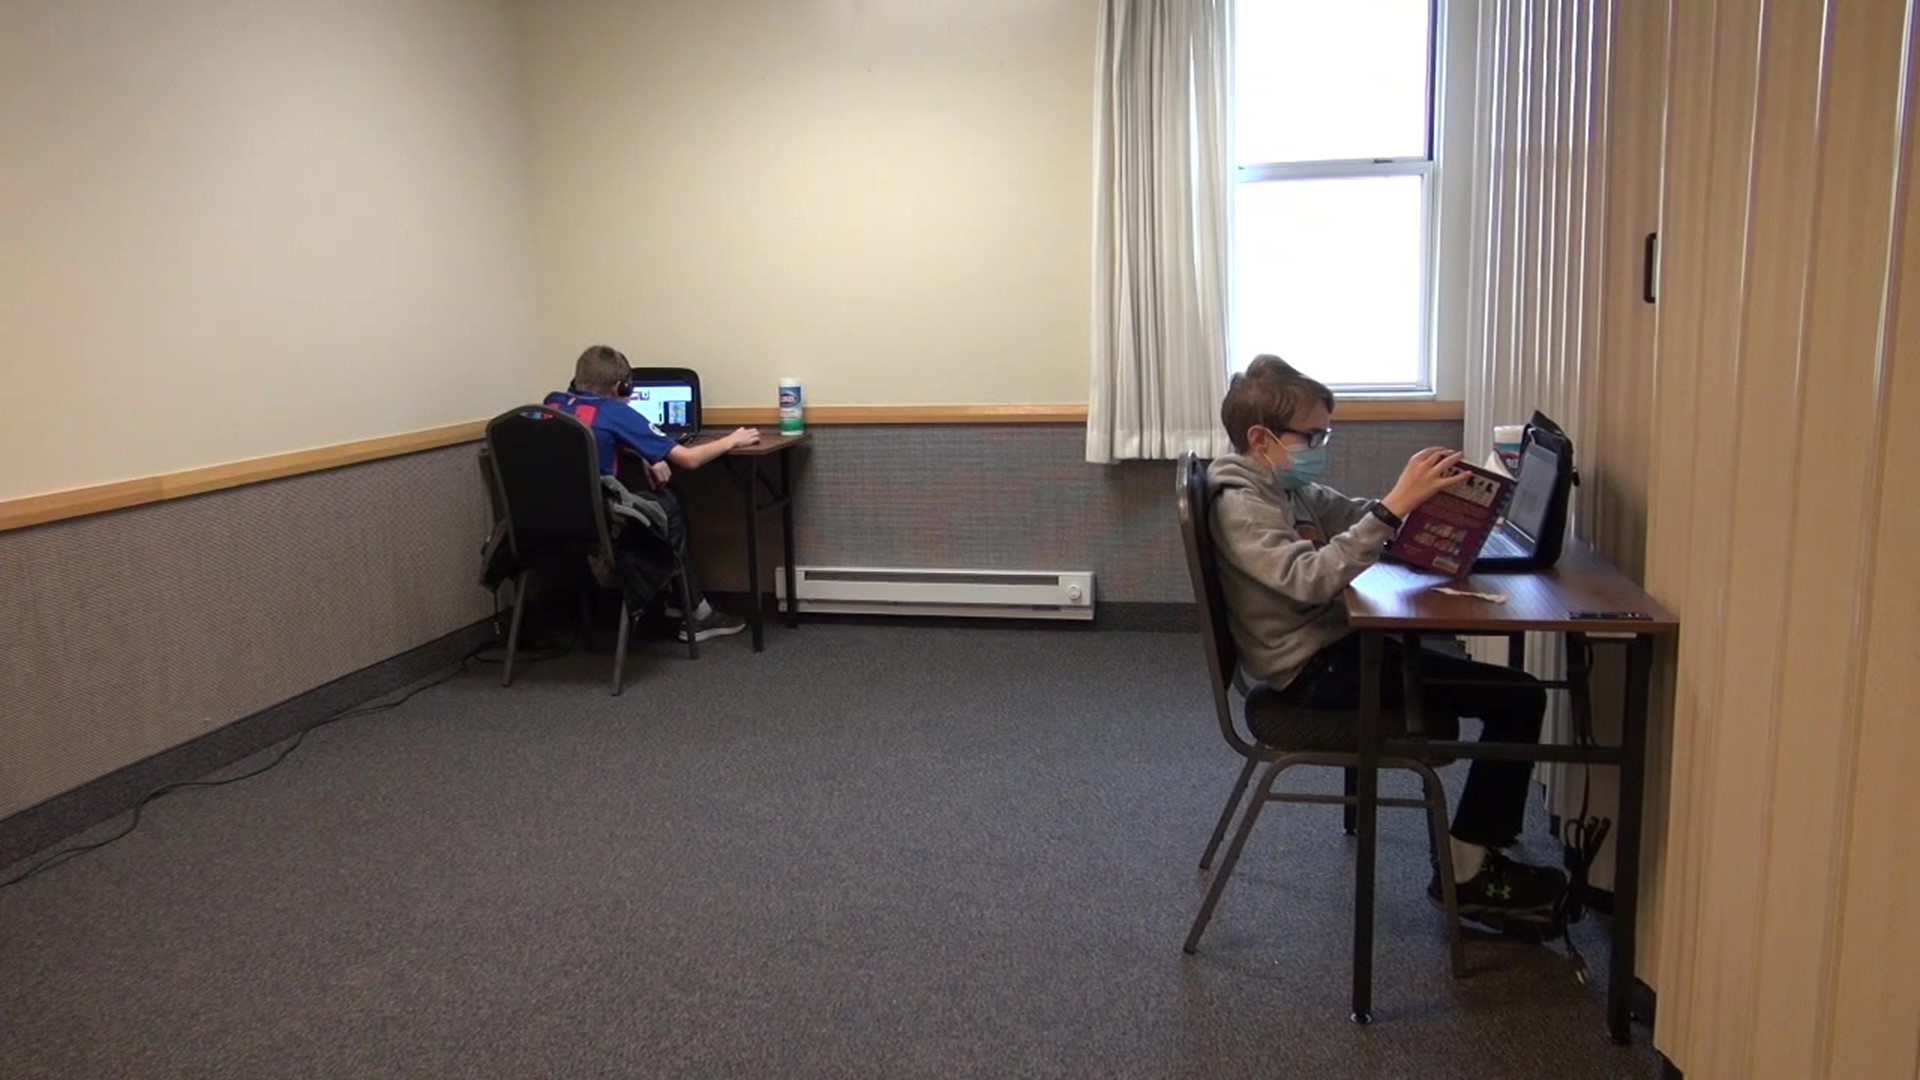 With many students still doing school virtually, connection to the internet may be an issue, especially for those living in rural areas like Wyoming County.